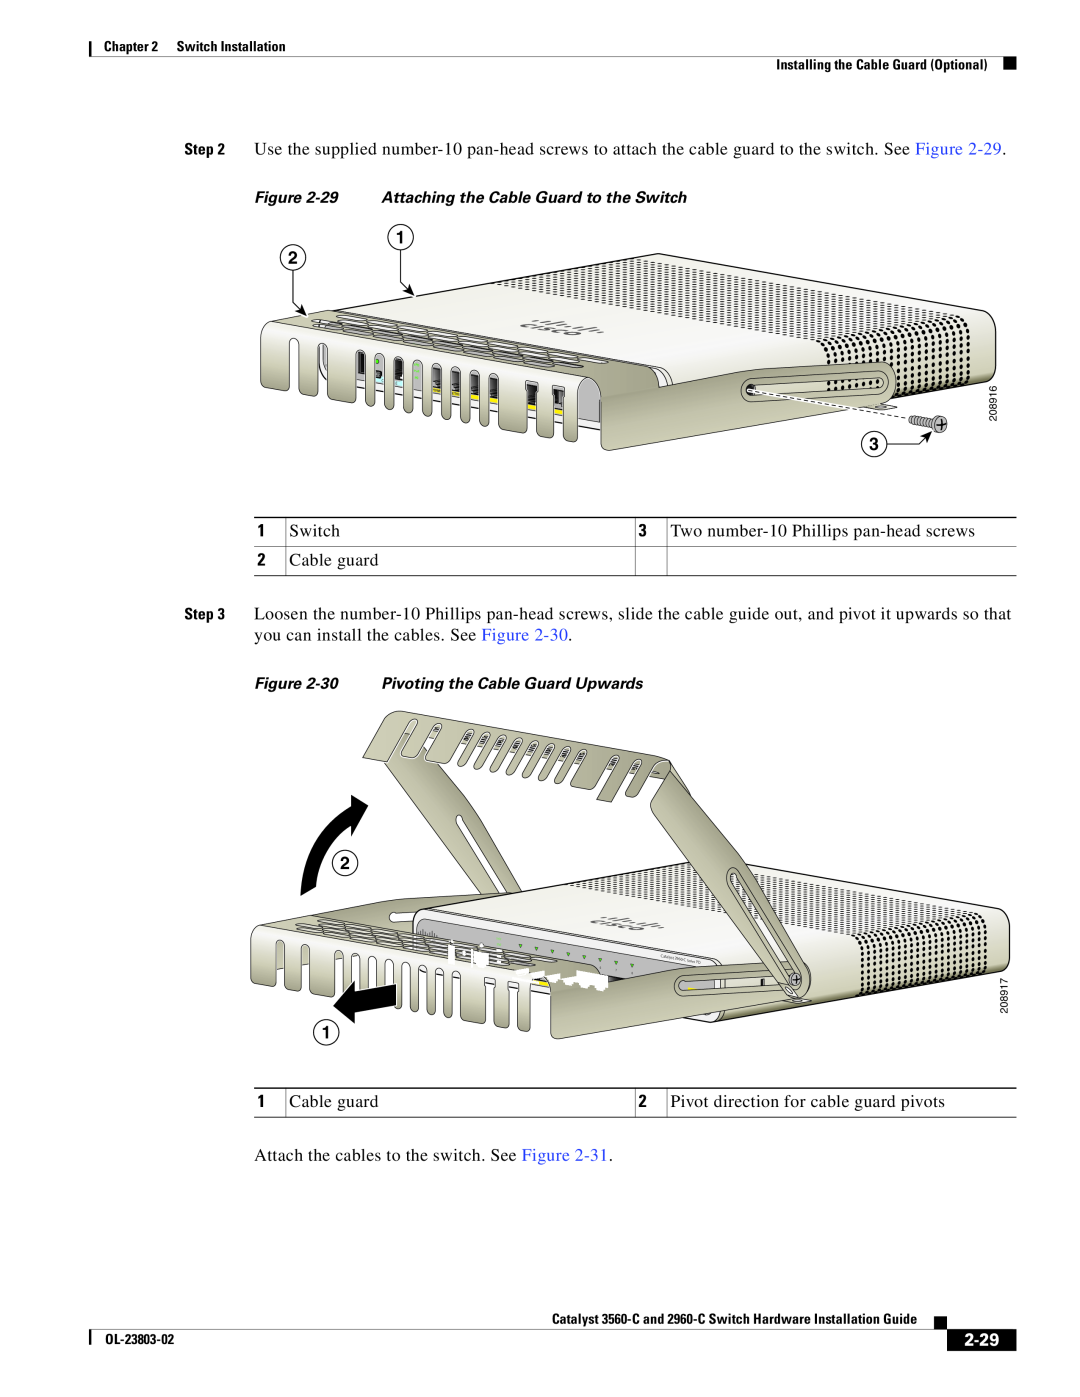 Cisco Systems N55M4Q manual 2-29, 29 Attaching the Cable Guard to the Switch, 30 Pivoting the Cable Guard Upwards, Catalyst 